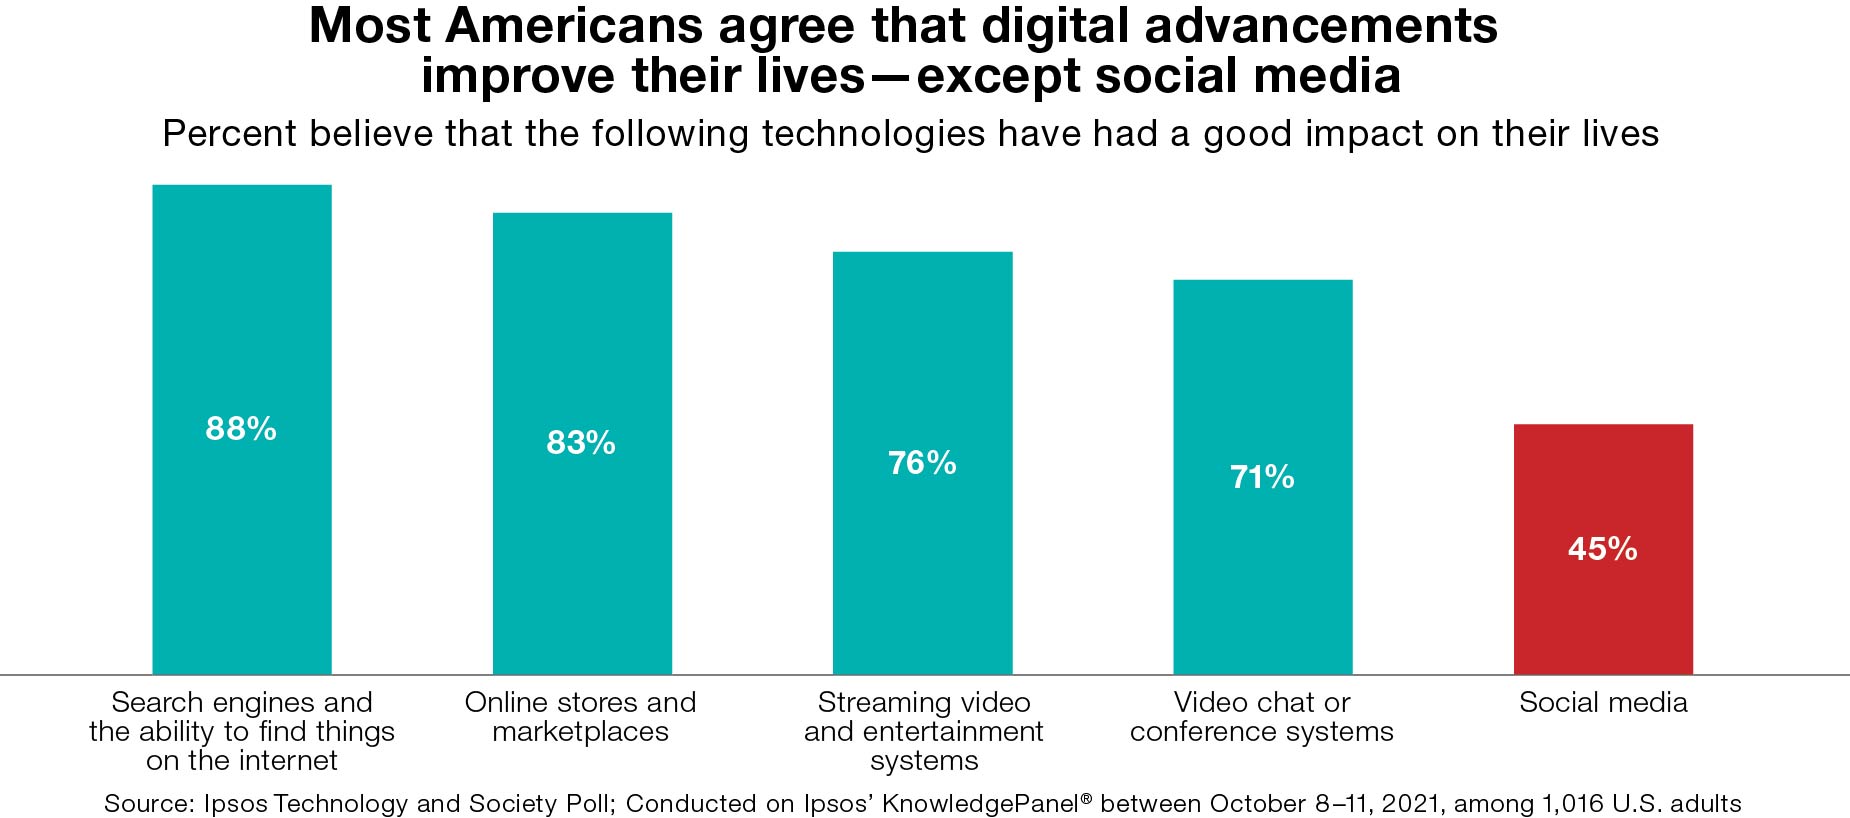 Most Americans agree that digital advancements improve their lives—except social media